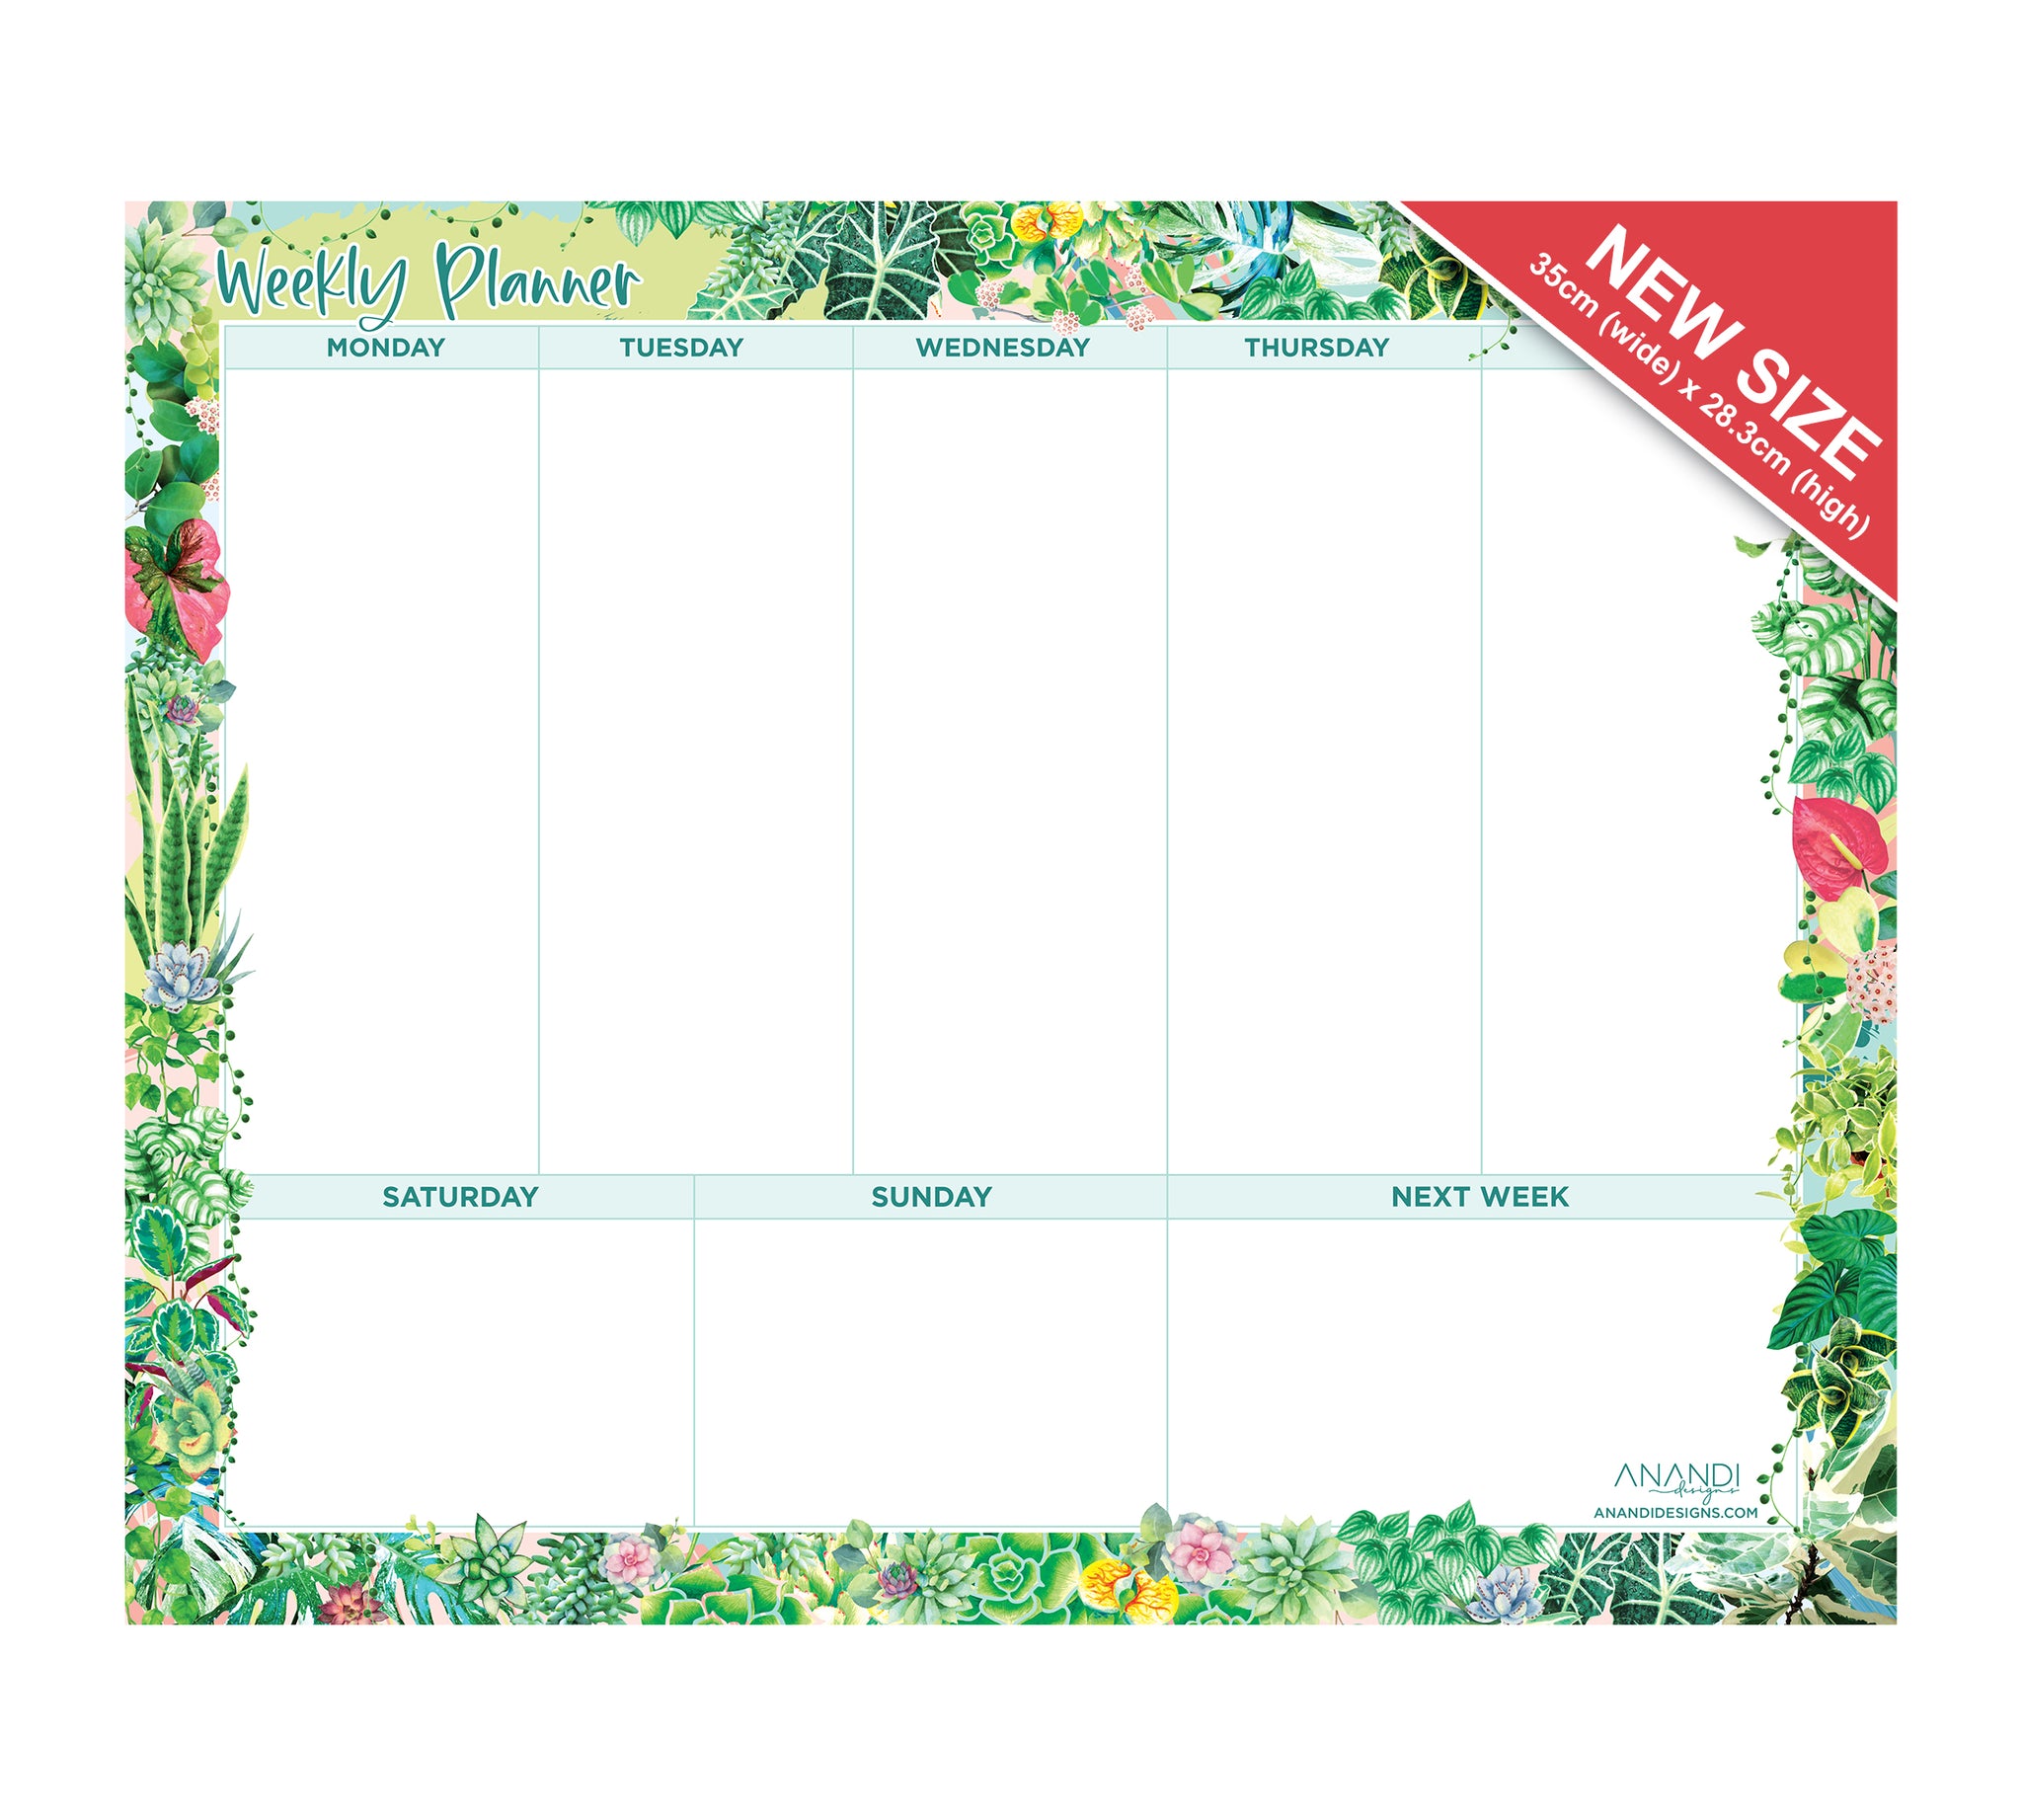 Magnetic Weekly Planner - Plant Lover (SMALL 35cm x 28.3cm)